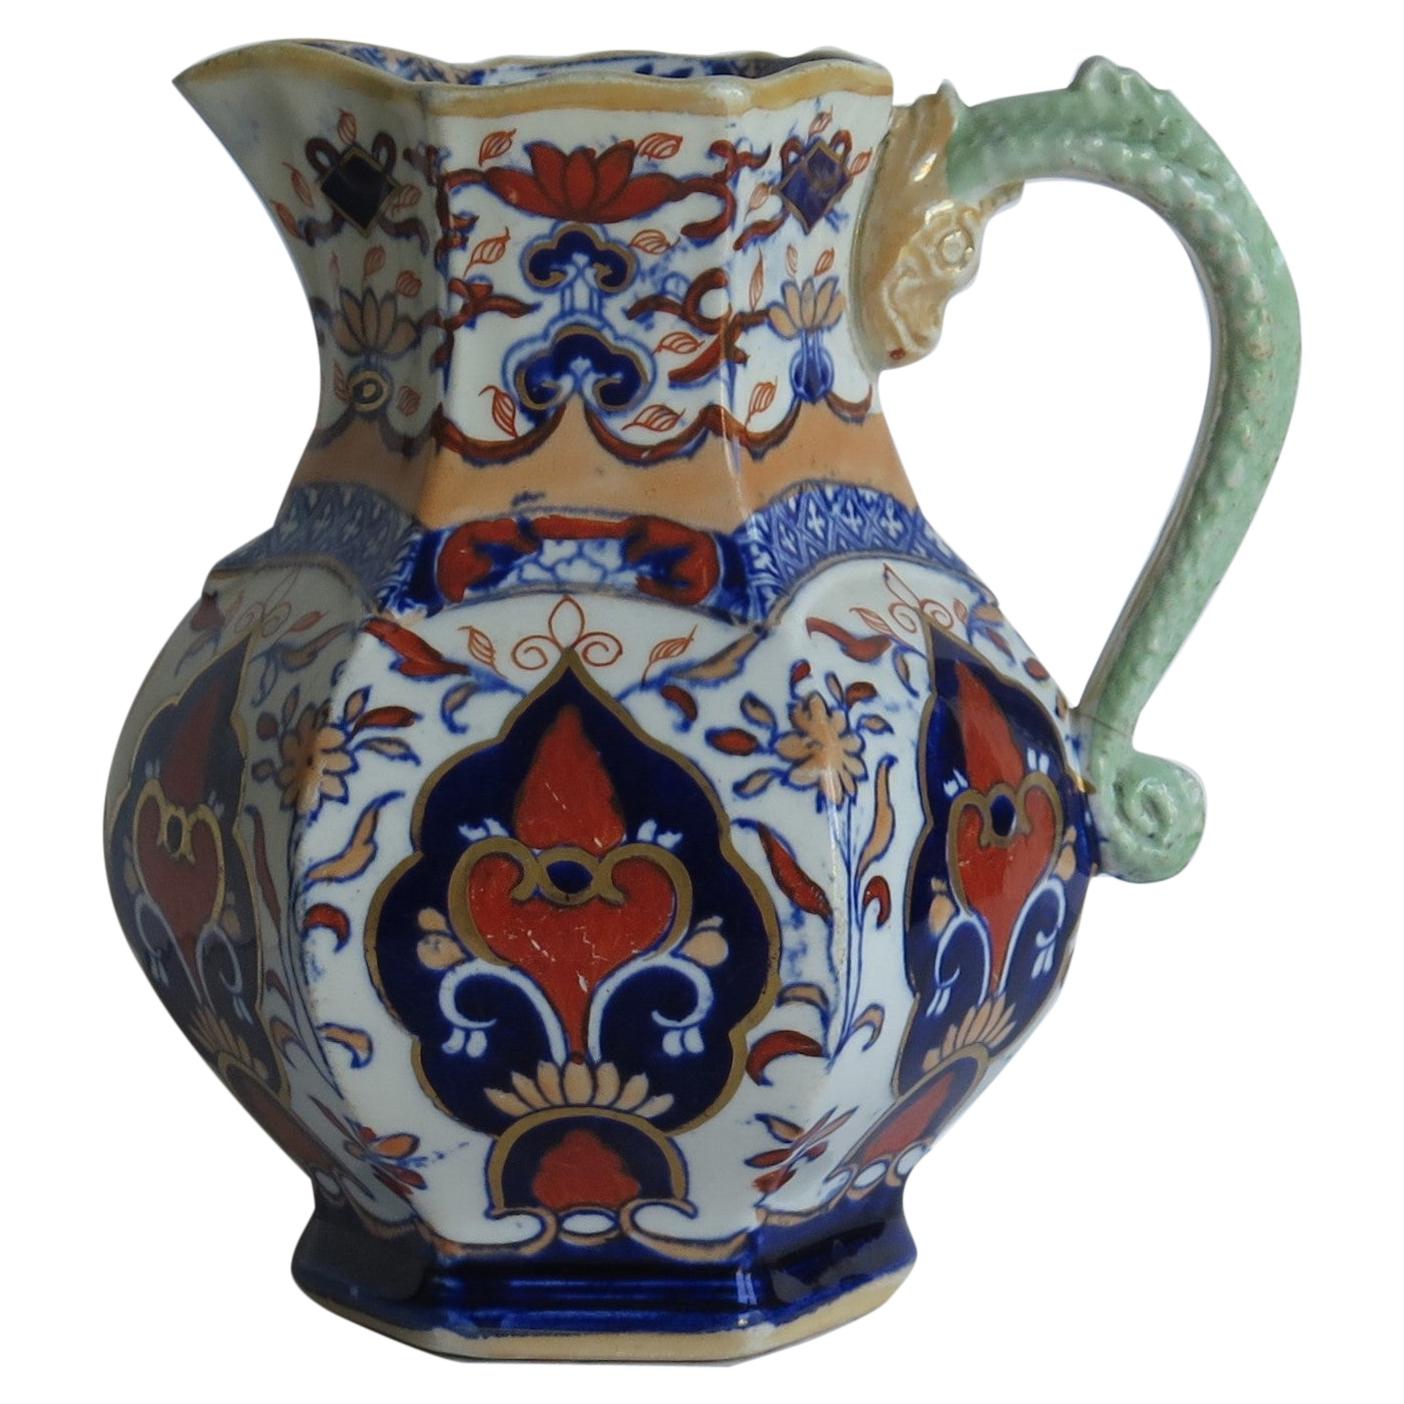 Mason's Ironstone Jug or Pitcher in Rare Shape and Pattern 306, circa 1830